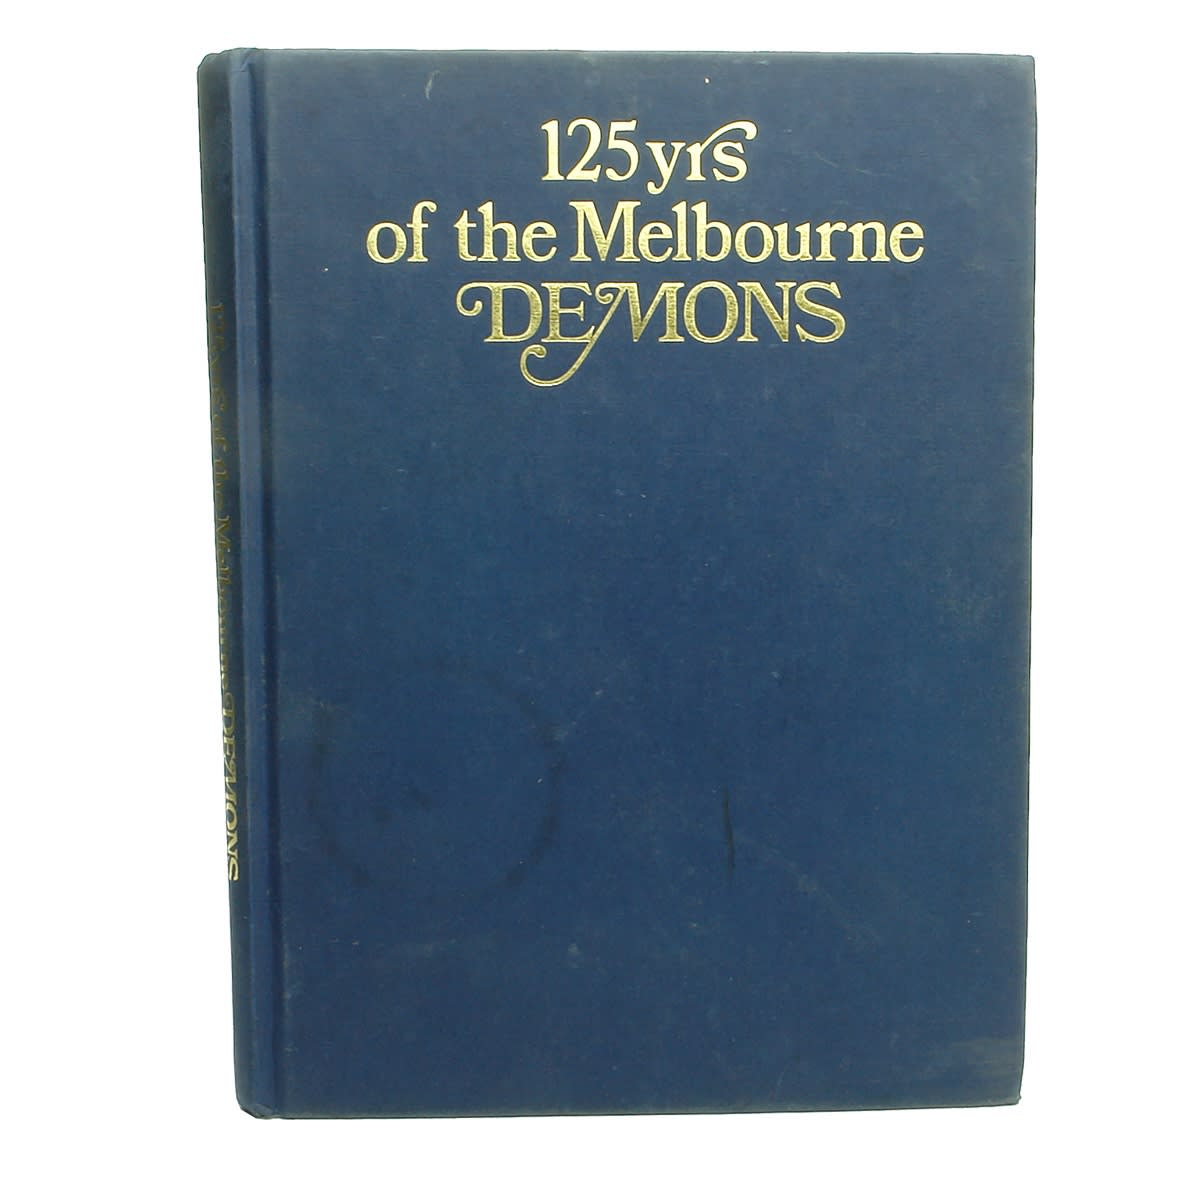 Book. 125 yrs of the Melbourne Demons, Greg Hobbs, 1983. (Victoria)